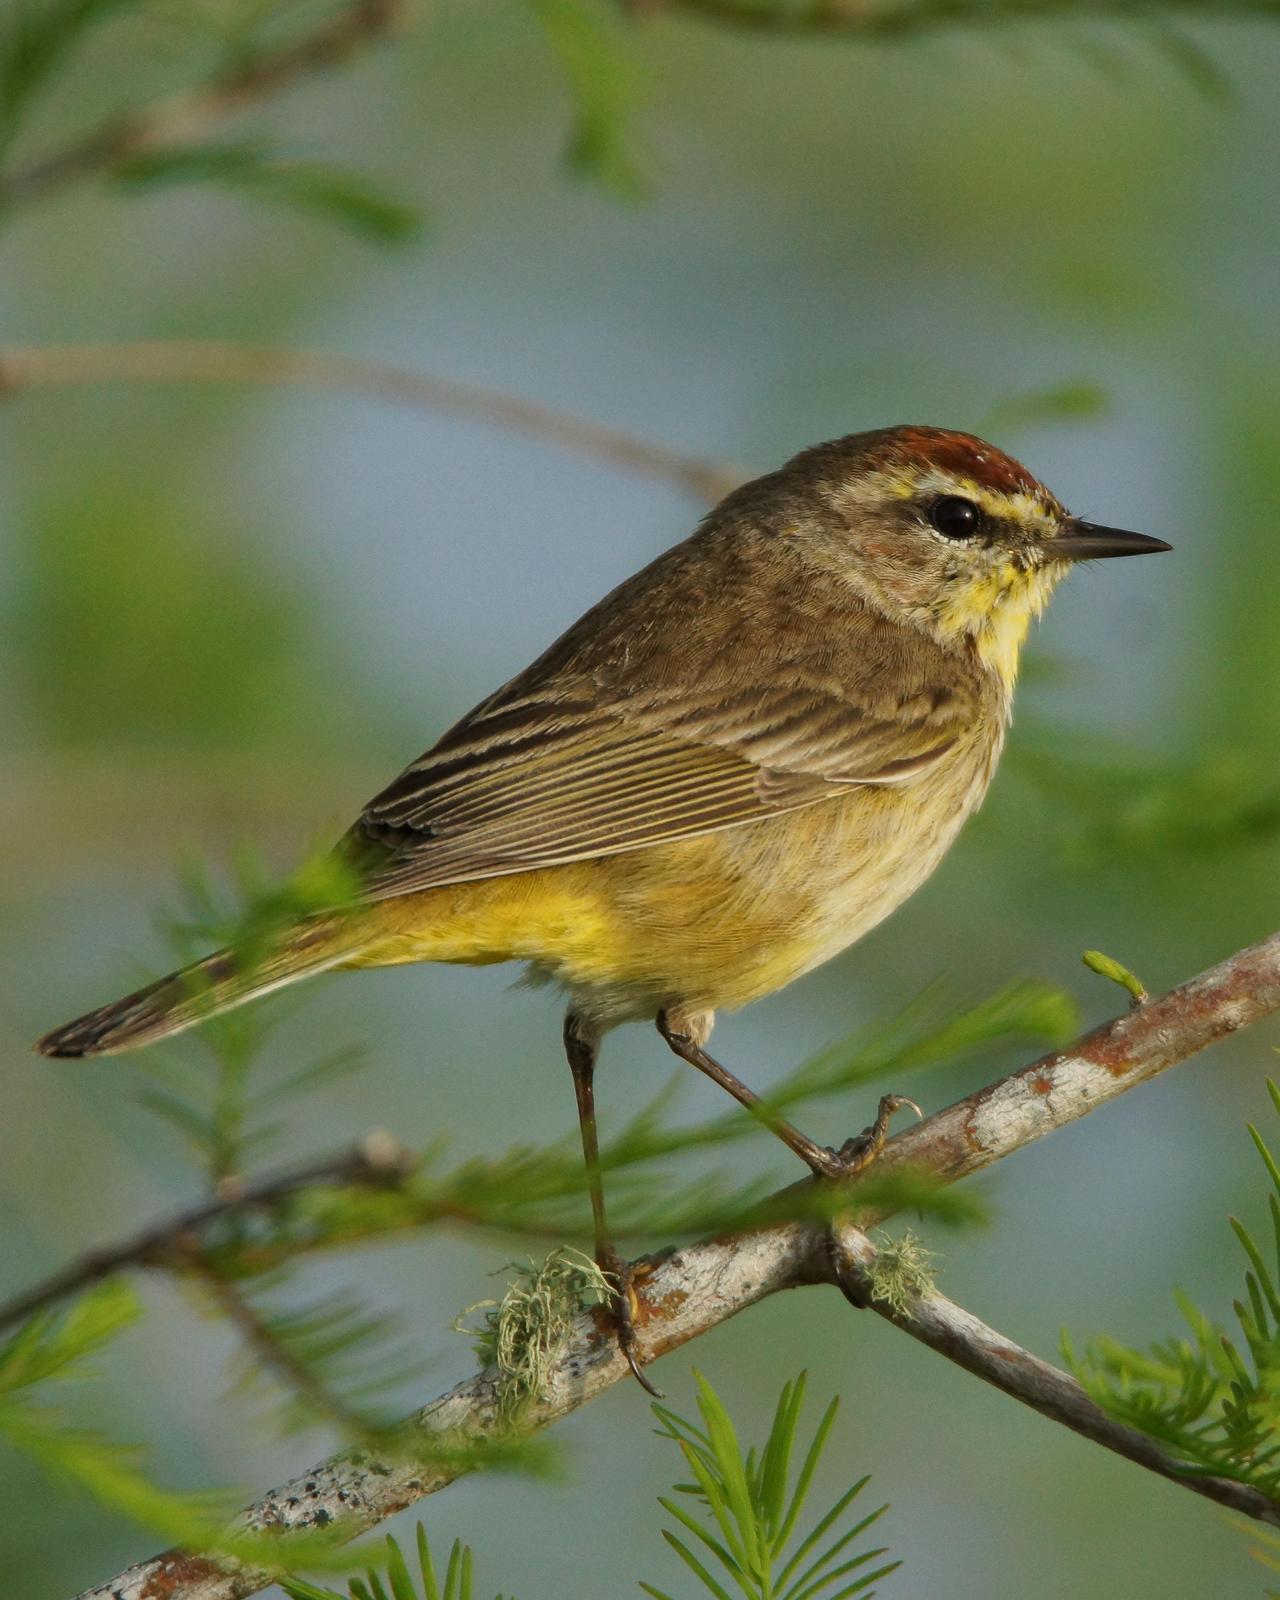 Palm Warbler Photo by Steve Percival